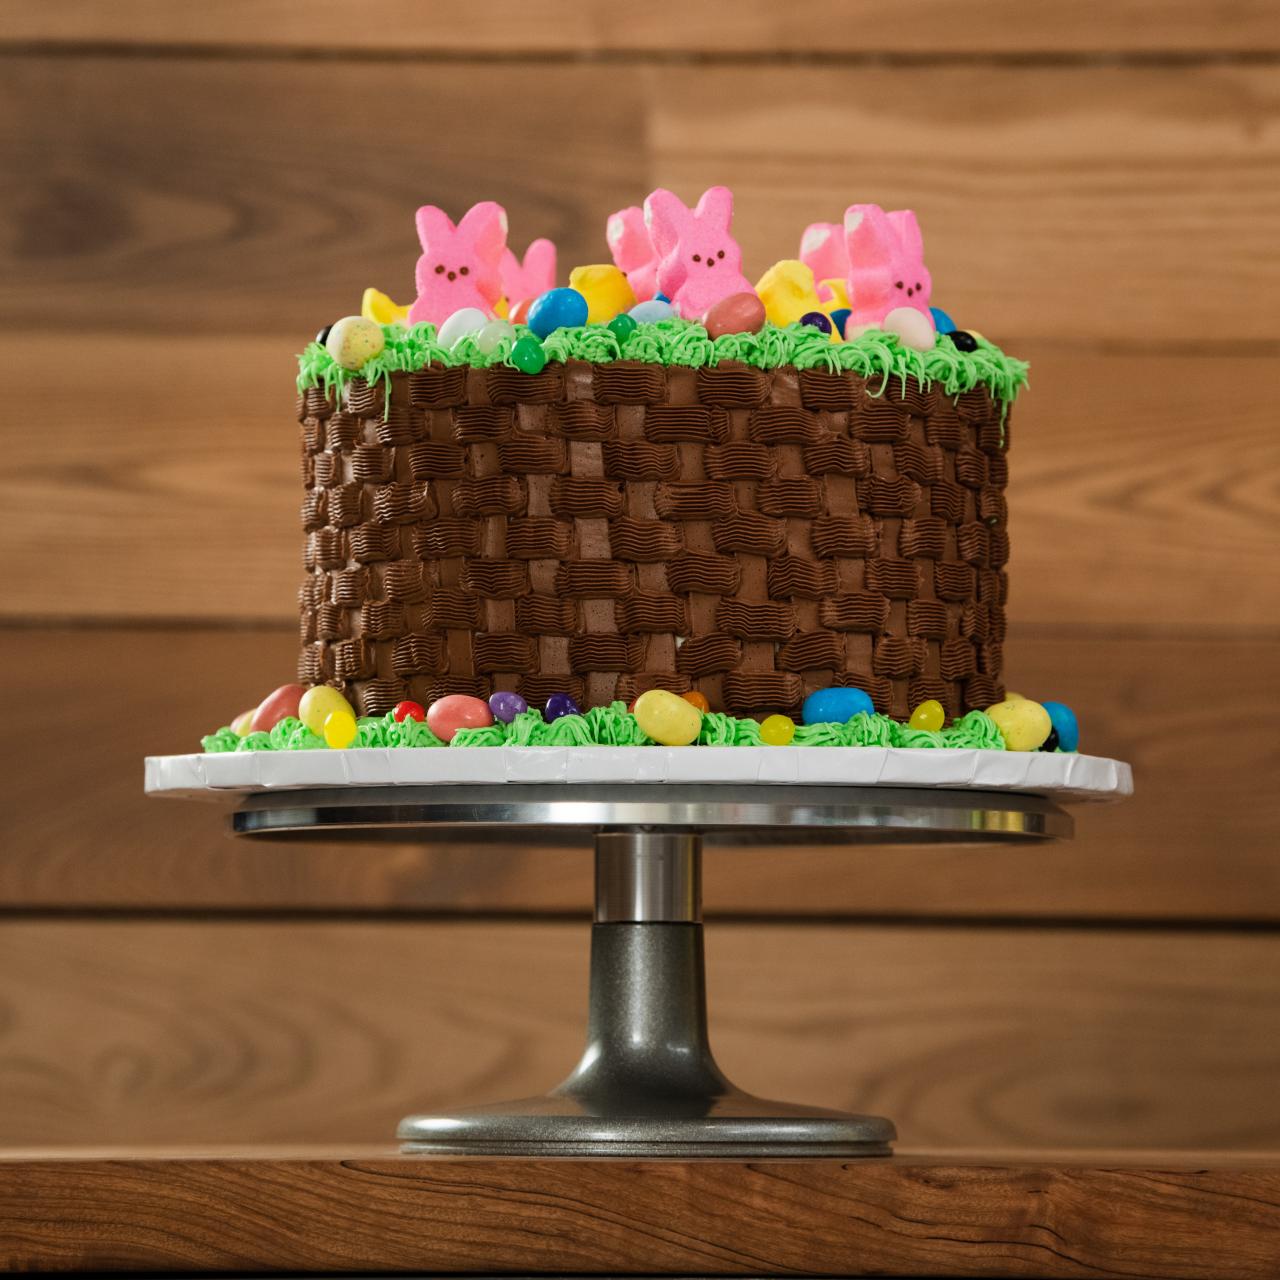 The Best Cake Decorating Turntable, FN Dish - Behind-the-Scenes, Food  Trends, and Best Recipes : Food Network